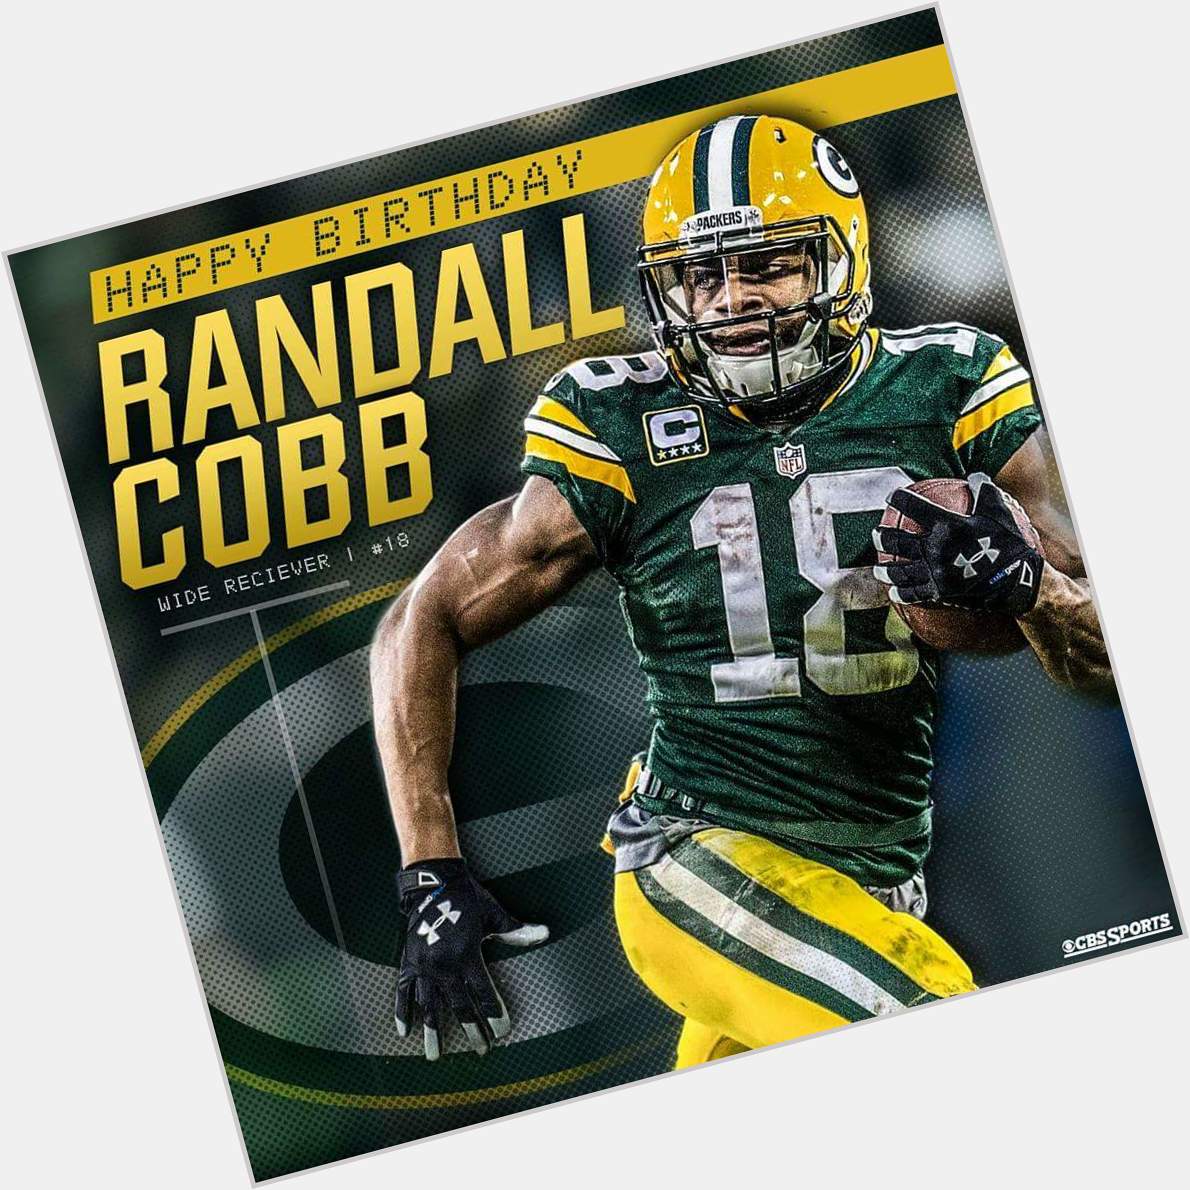 Happy Birthday Randall Cobb, lot of respect for you but we\re shutting you down this season 